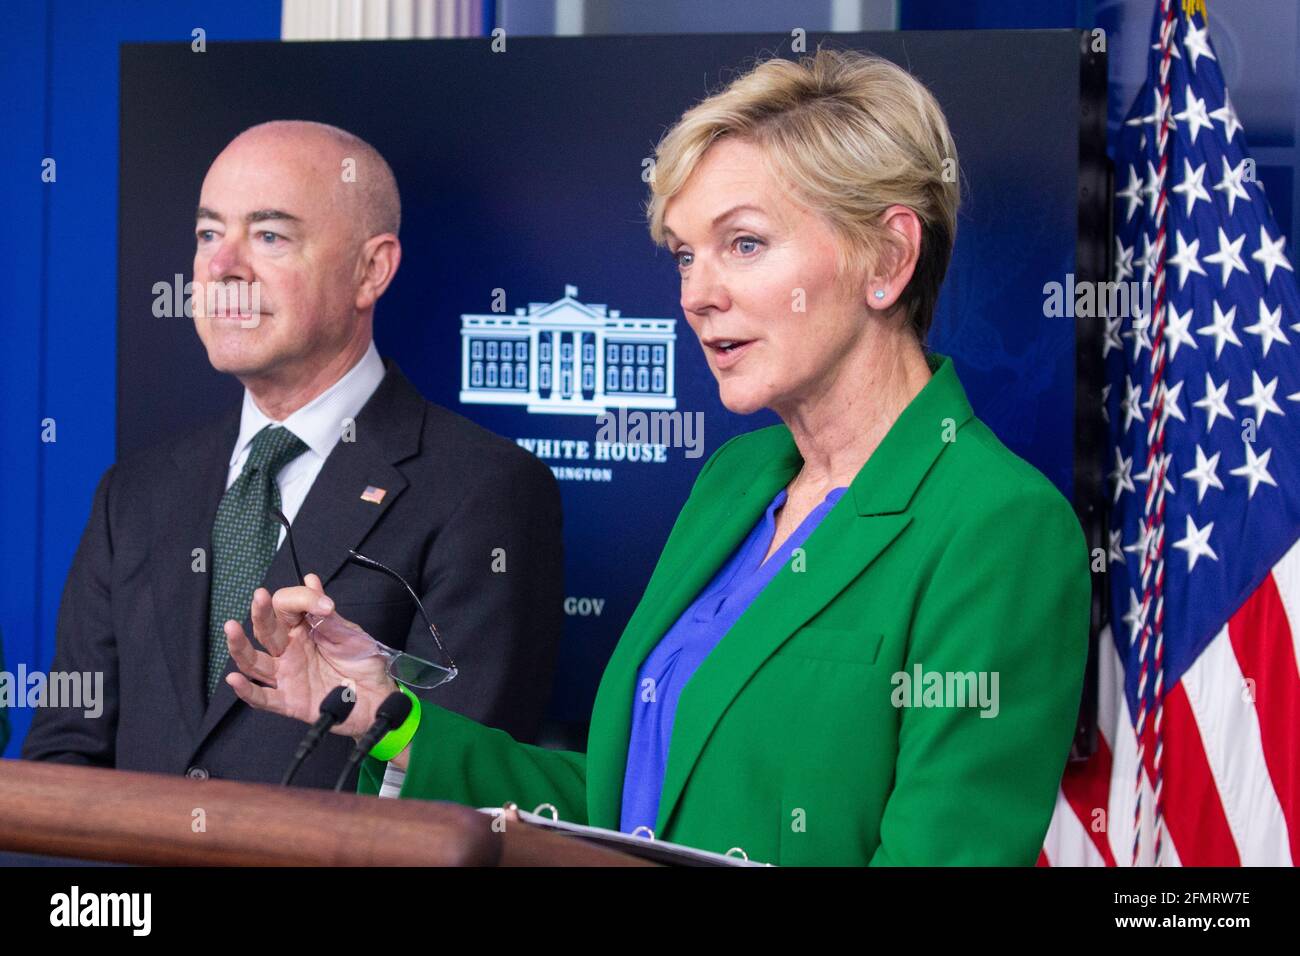 US Secretary of Homeland Security Alejandro Mayorkas (L) and US Secretary of Energy Jennifer Granholm (R) participate in a news conference during which the shutdown of the Colonial Pipeline was discussed, in the James Brady Press Briefing Room of the White House, in Washington, DC, USA, 11 May 2021. A demand for gasoline in Southeastern states has spiked following the shutdown of Colonial Pipeline due to a cyberattack.Credit: Michael Reynolds/Pool via CNP /MediaPunch Stock Photo